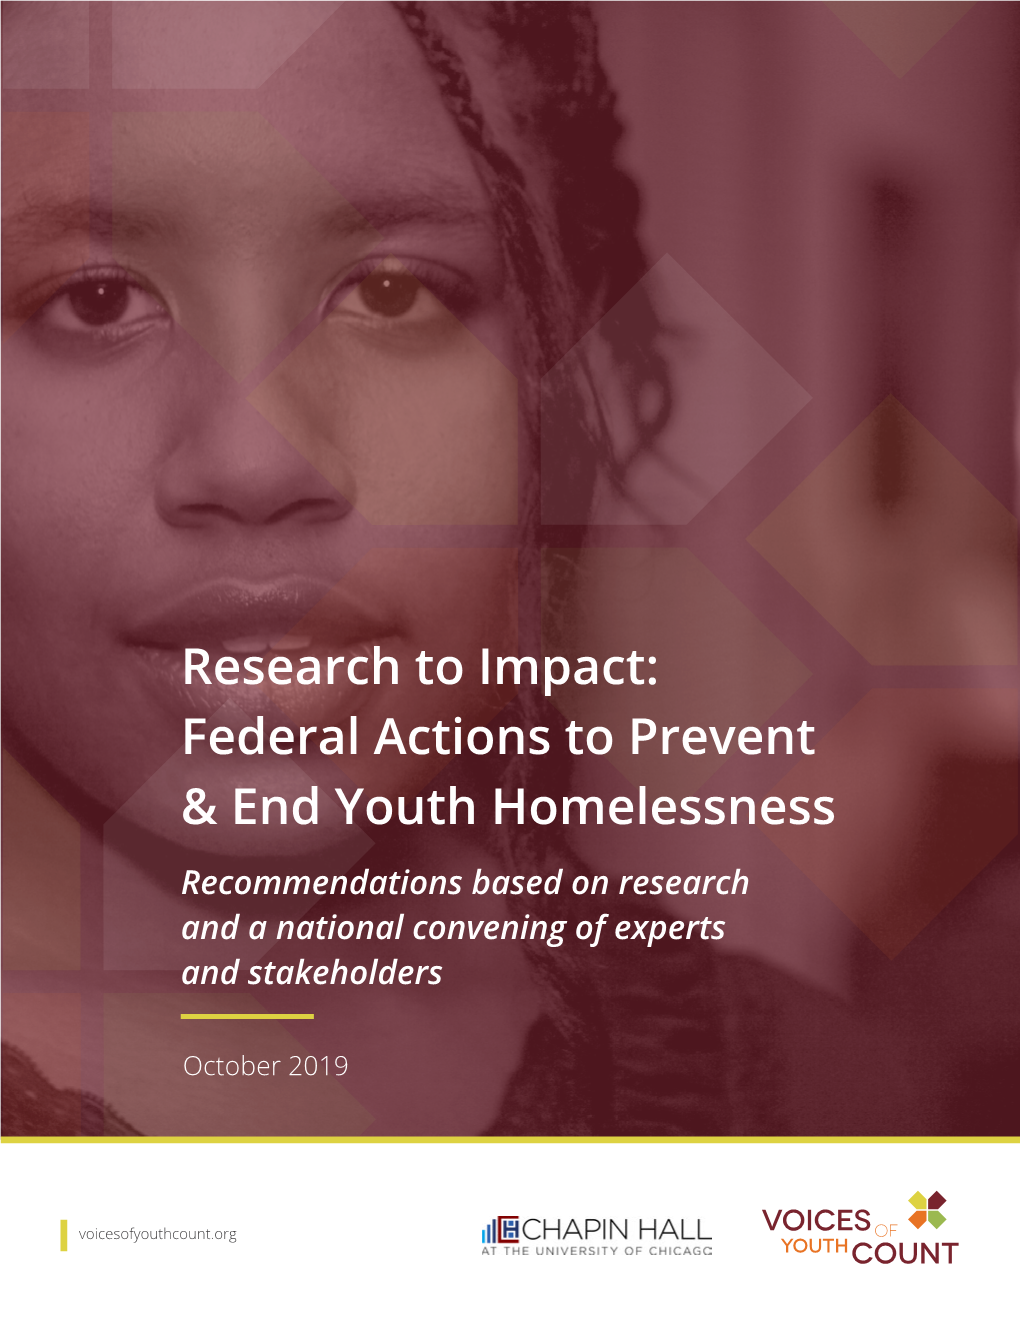 Federal Actions to Prevent & End Youth Homelessness